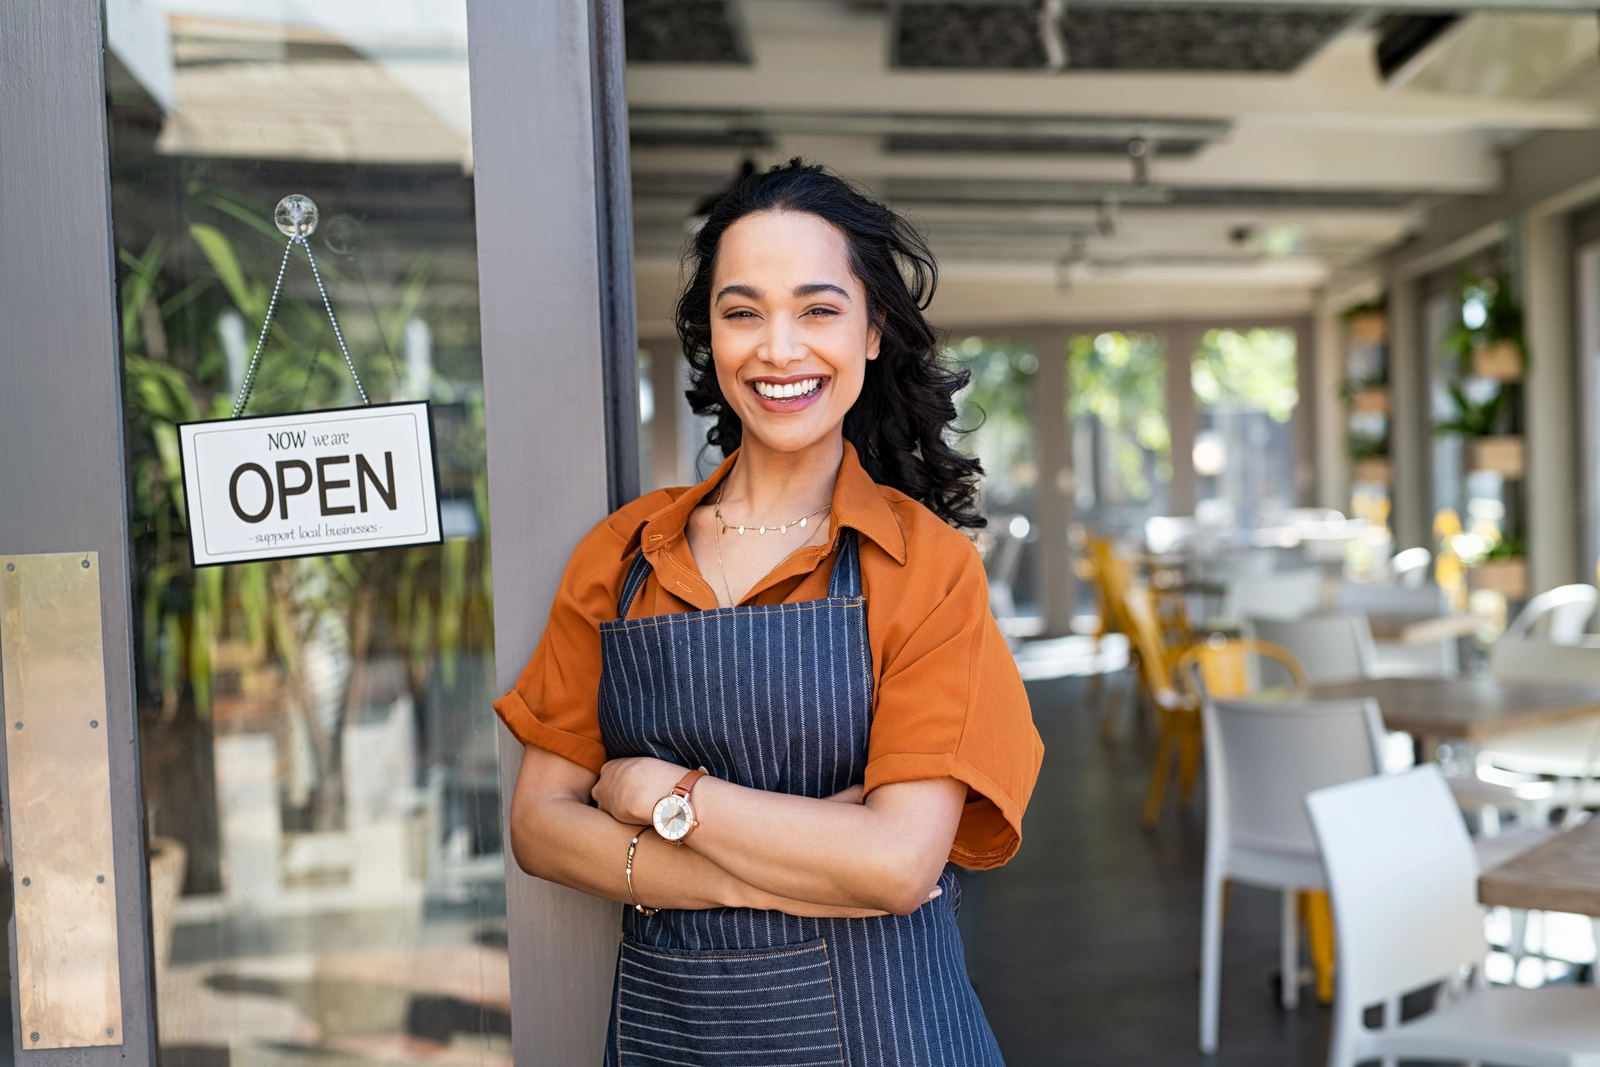 Resources to Help Fellow Small Business Owners